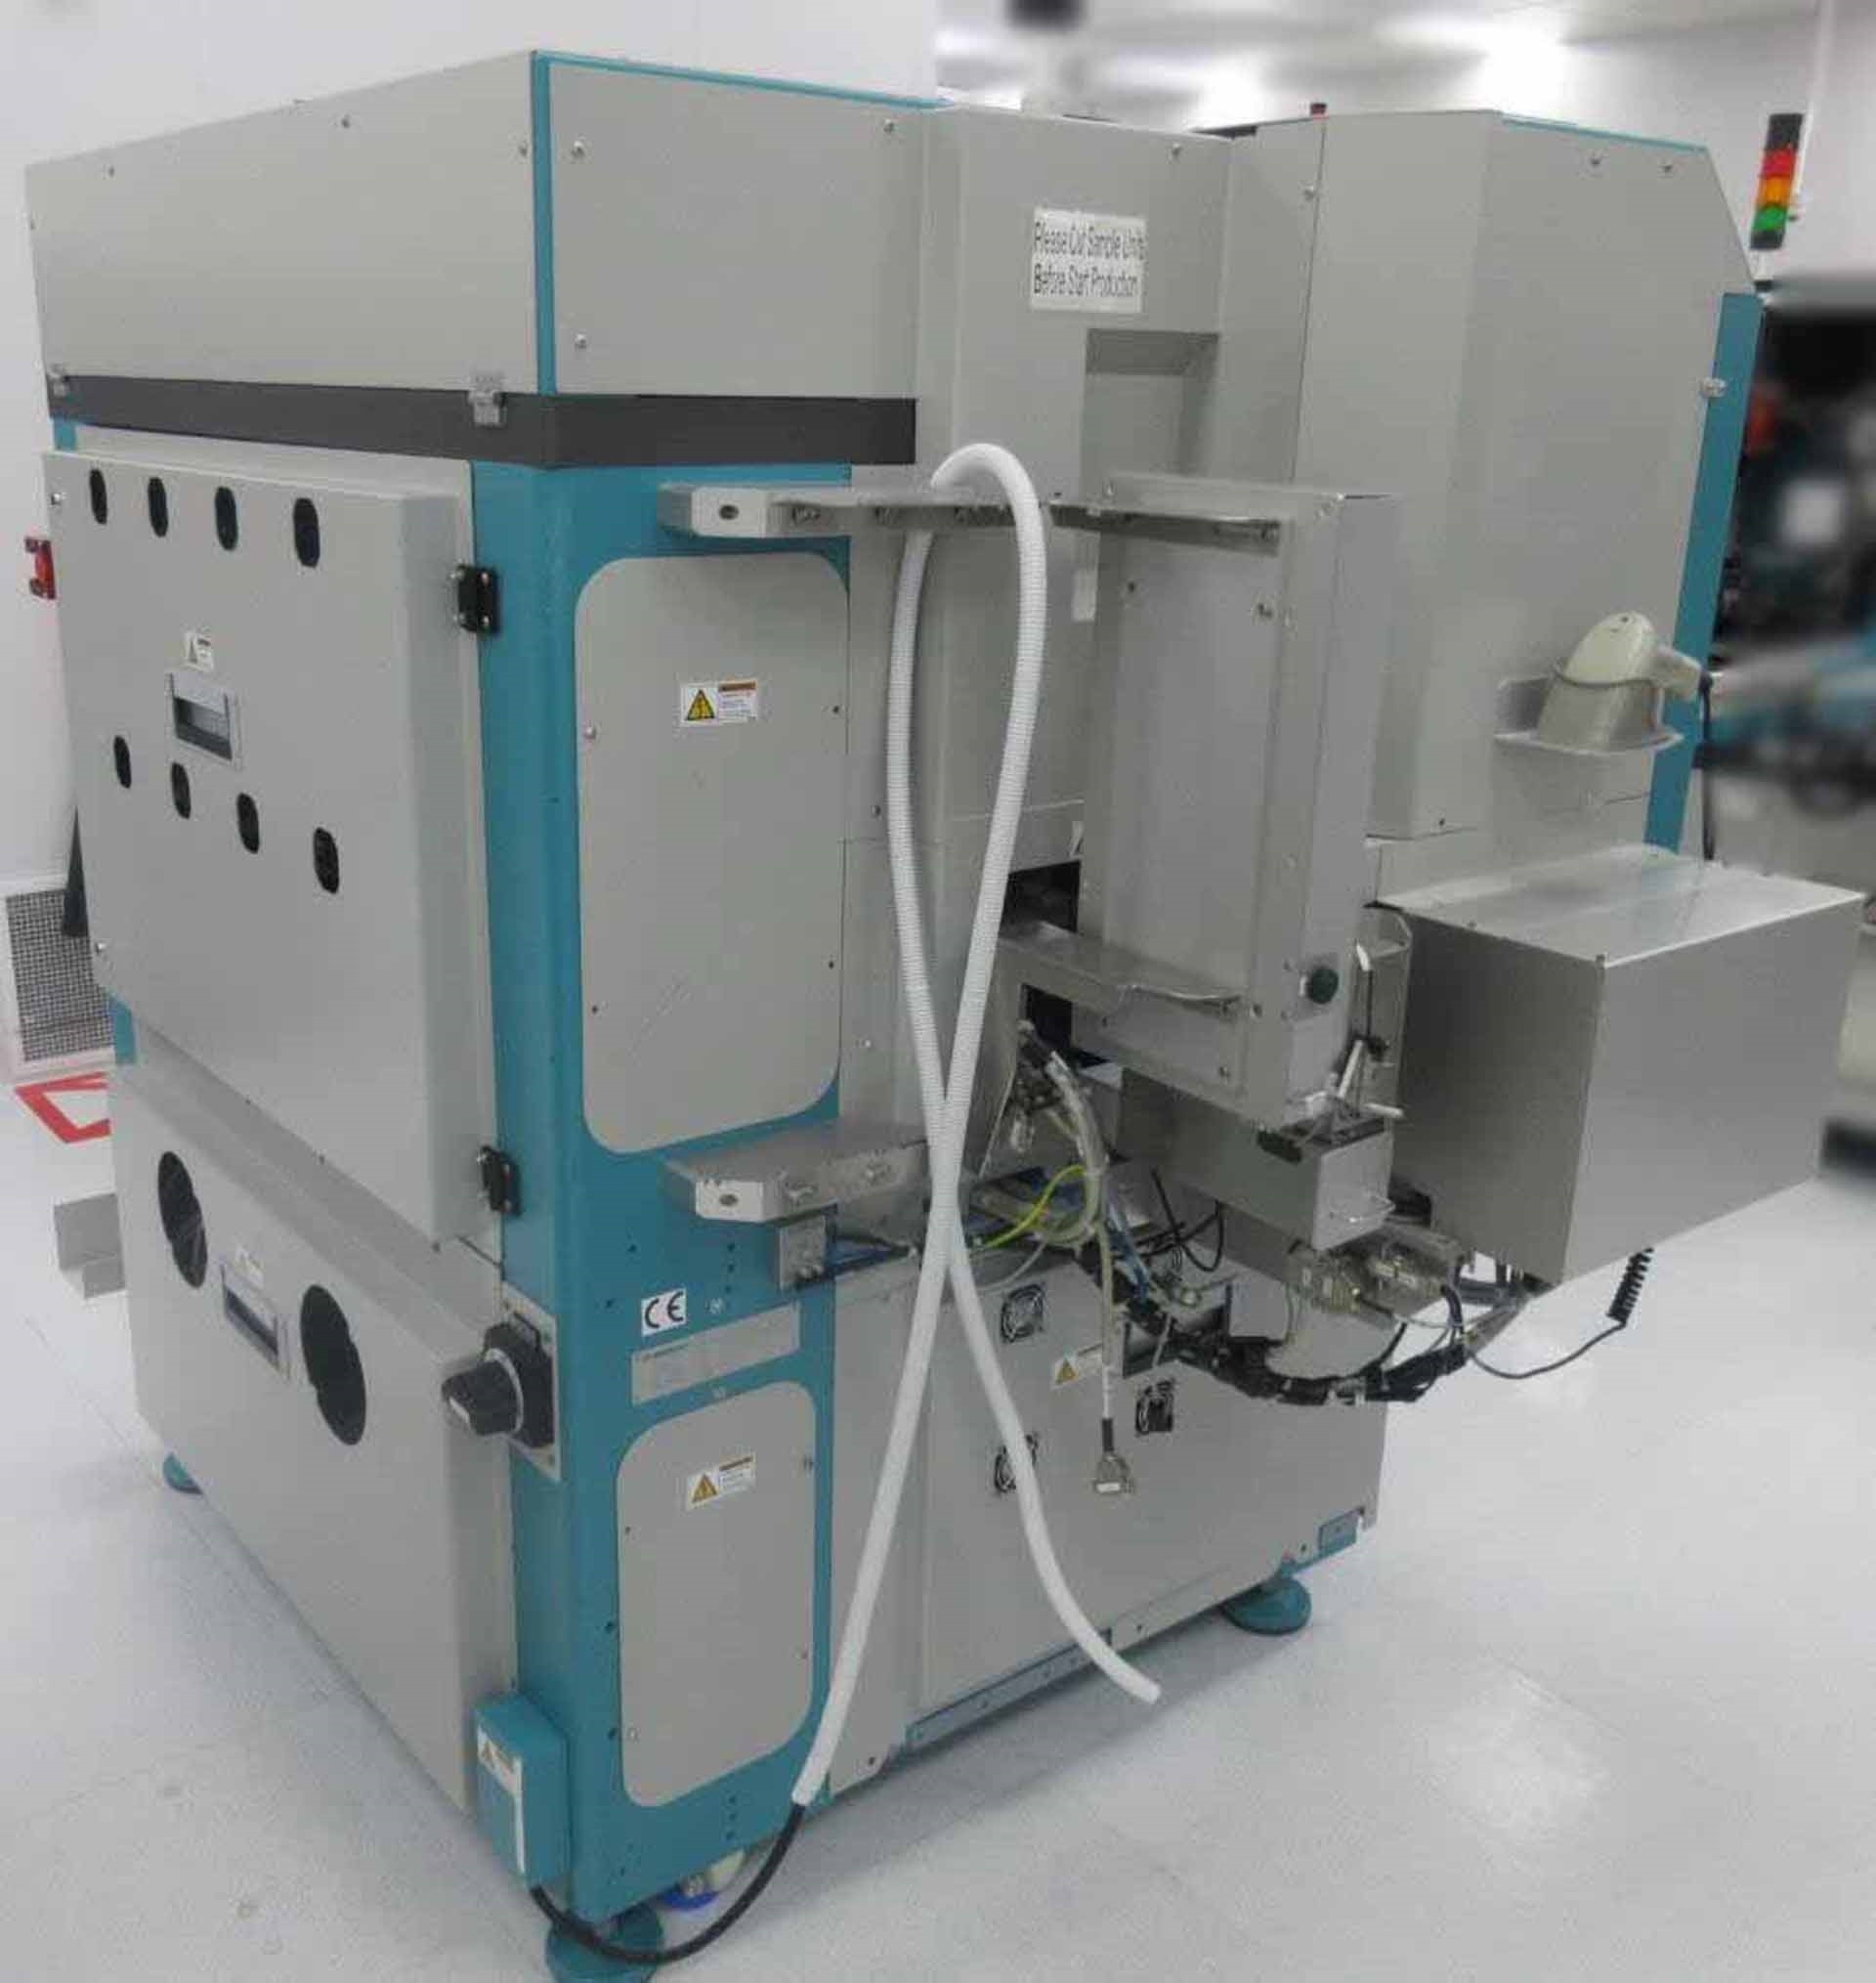 MUHLBAUER DS 10000 Bonder used for sale price #9239881, 2007 > buy from CAE